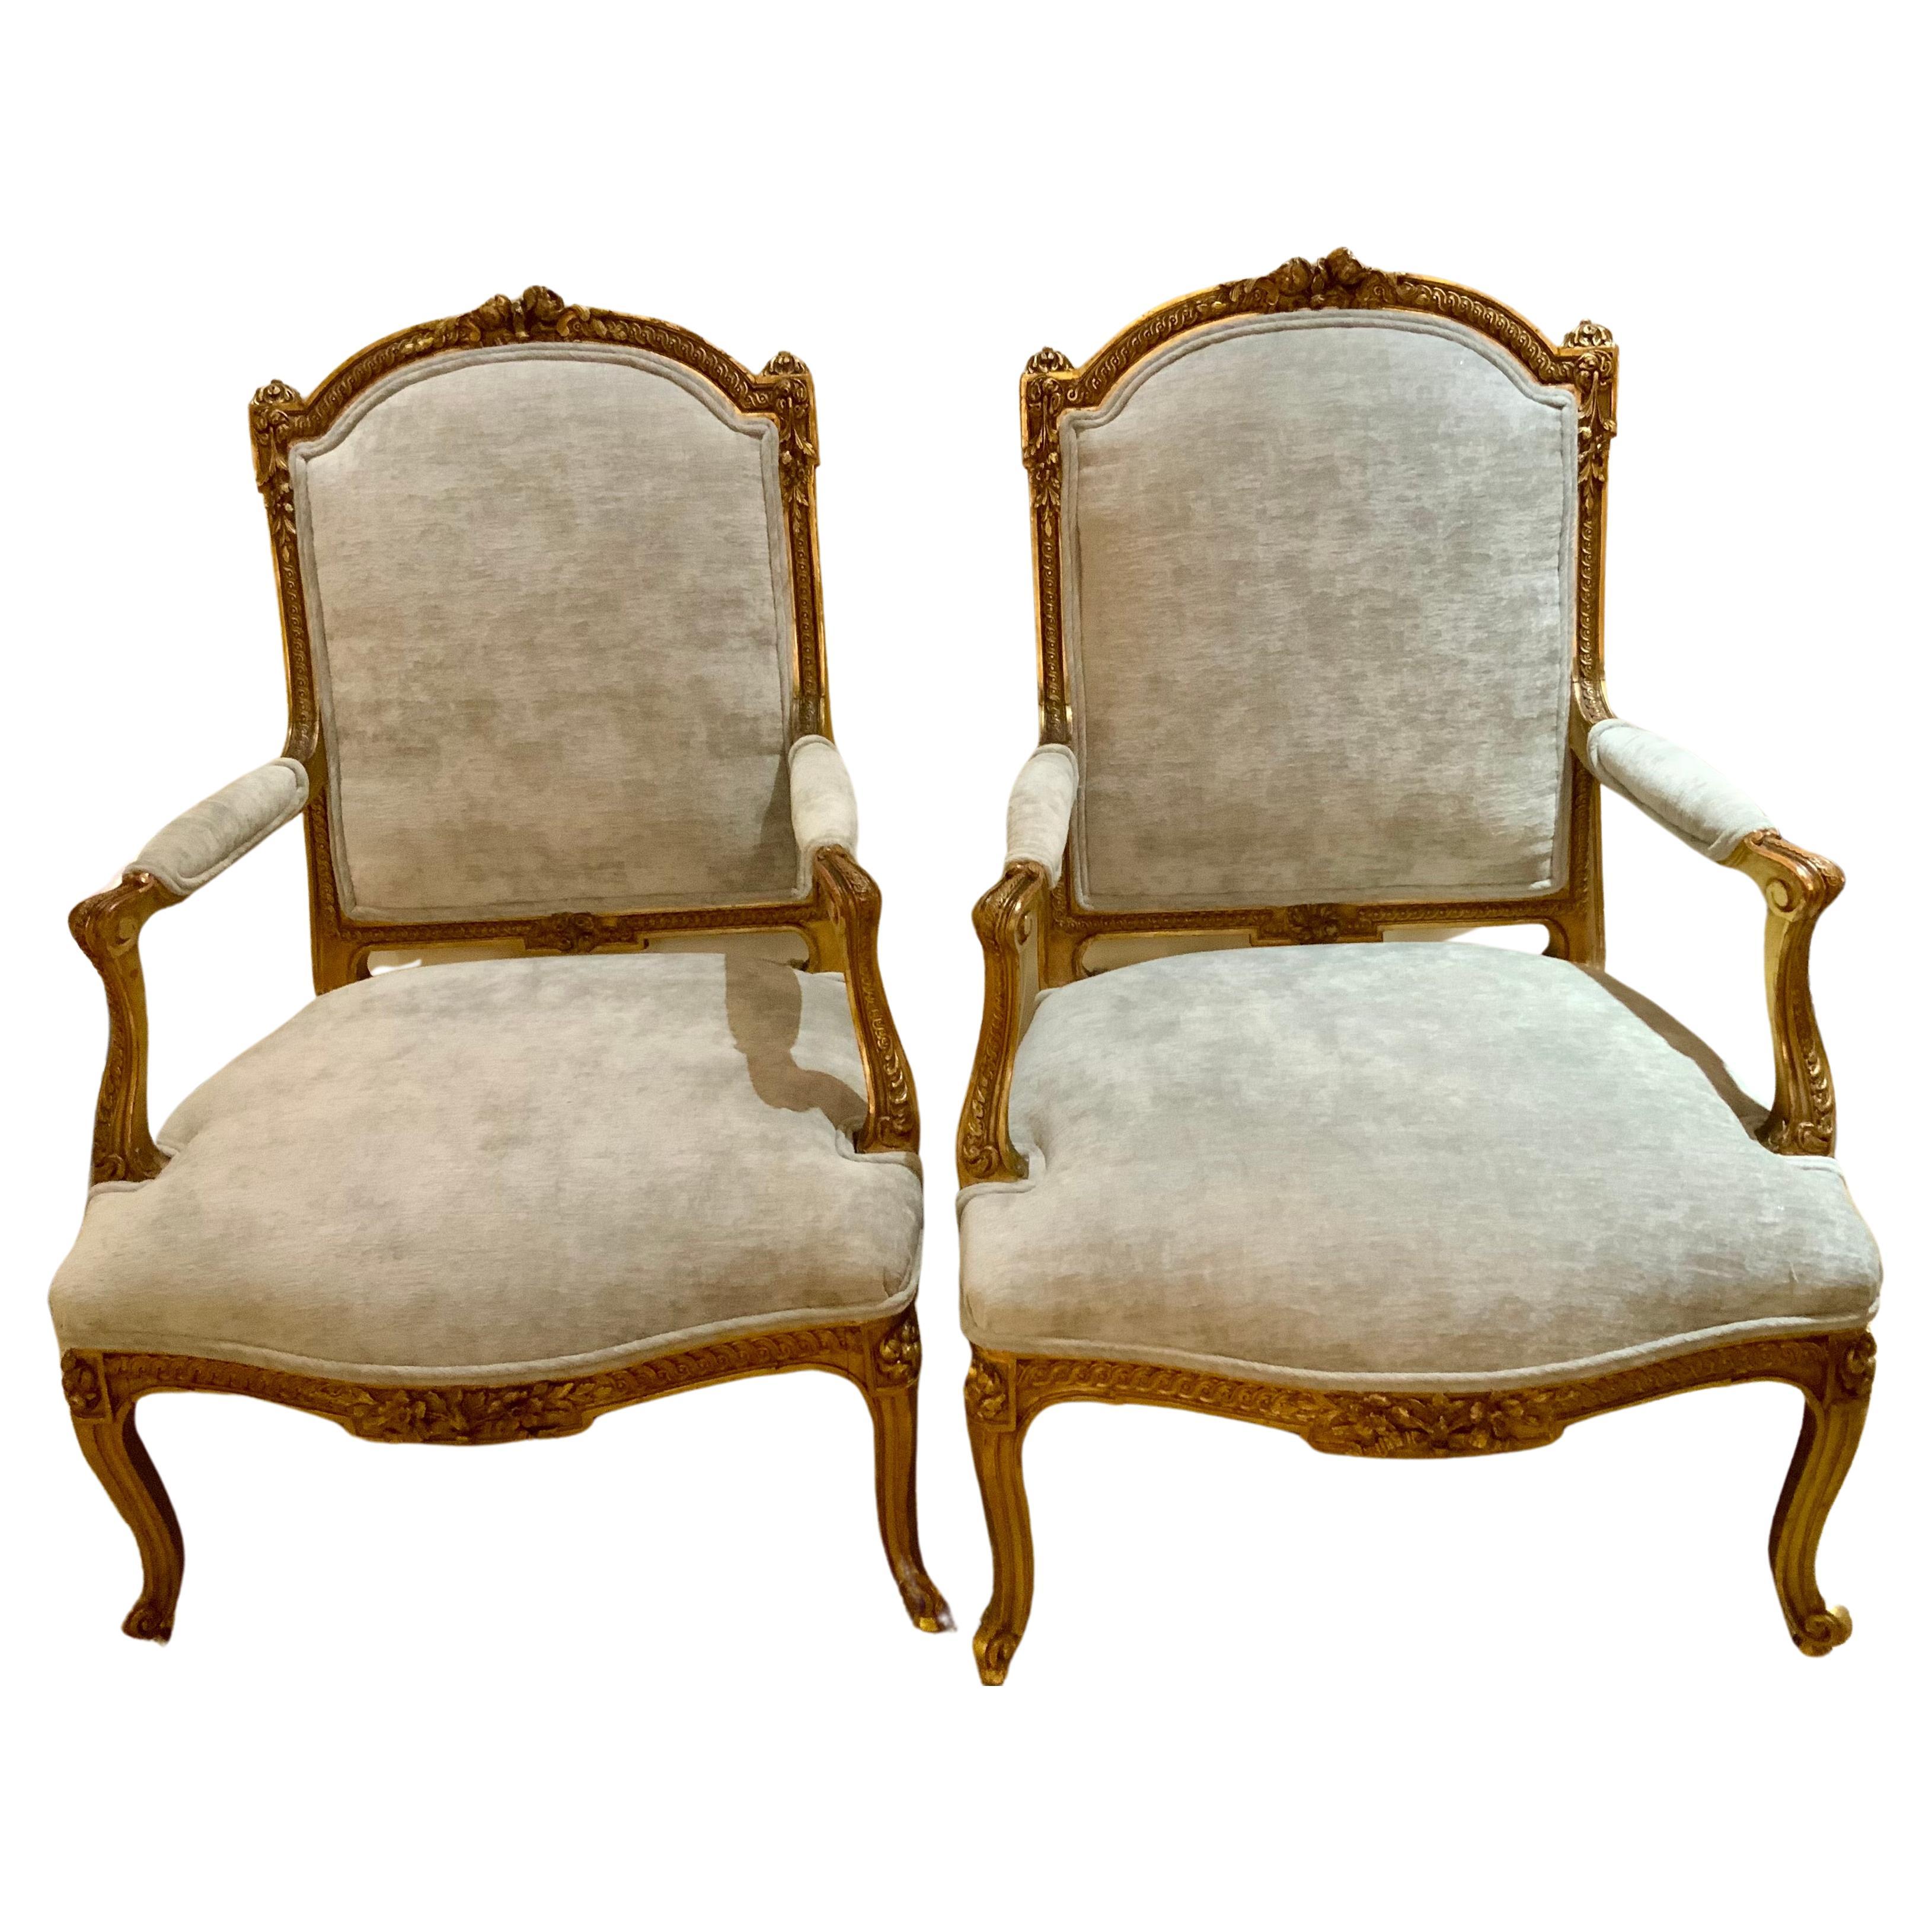 Pair of Louis XV-Style Giltwood Fauteuils/arm chairs For Sale